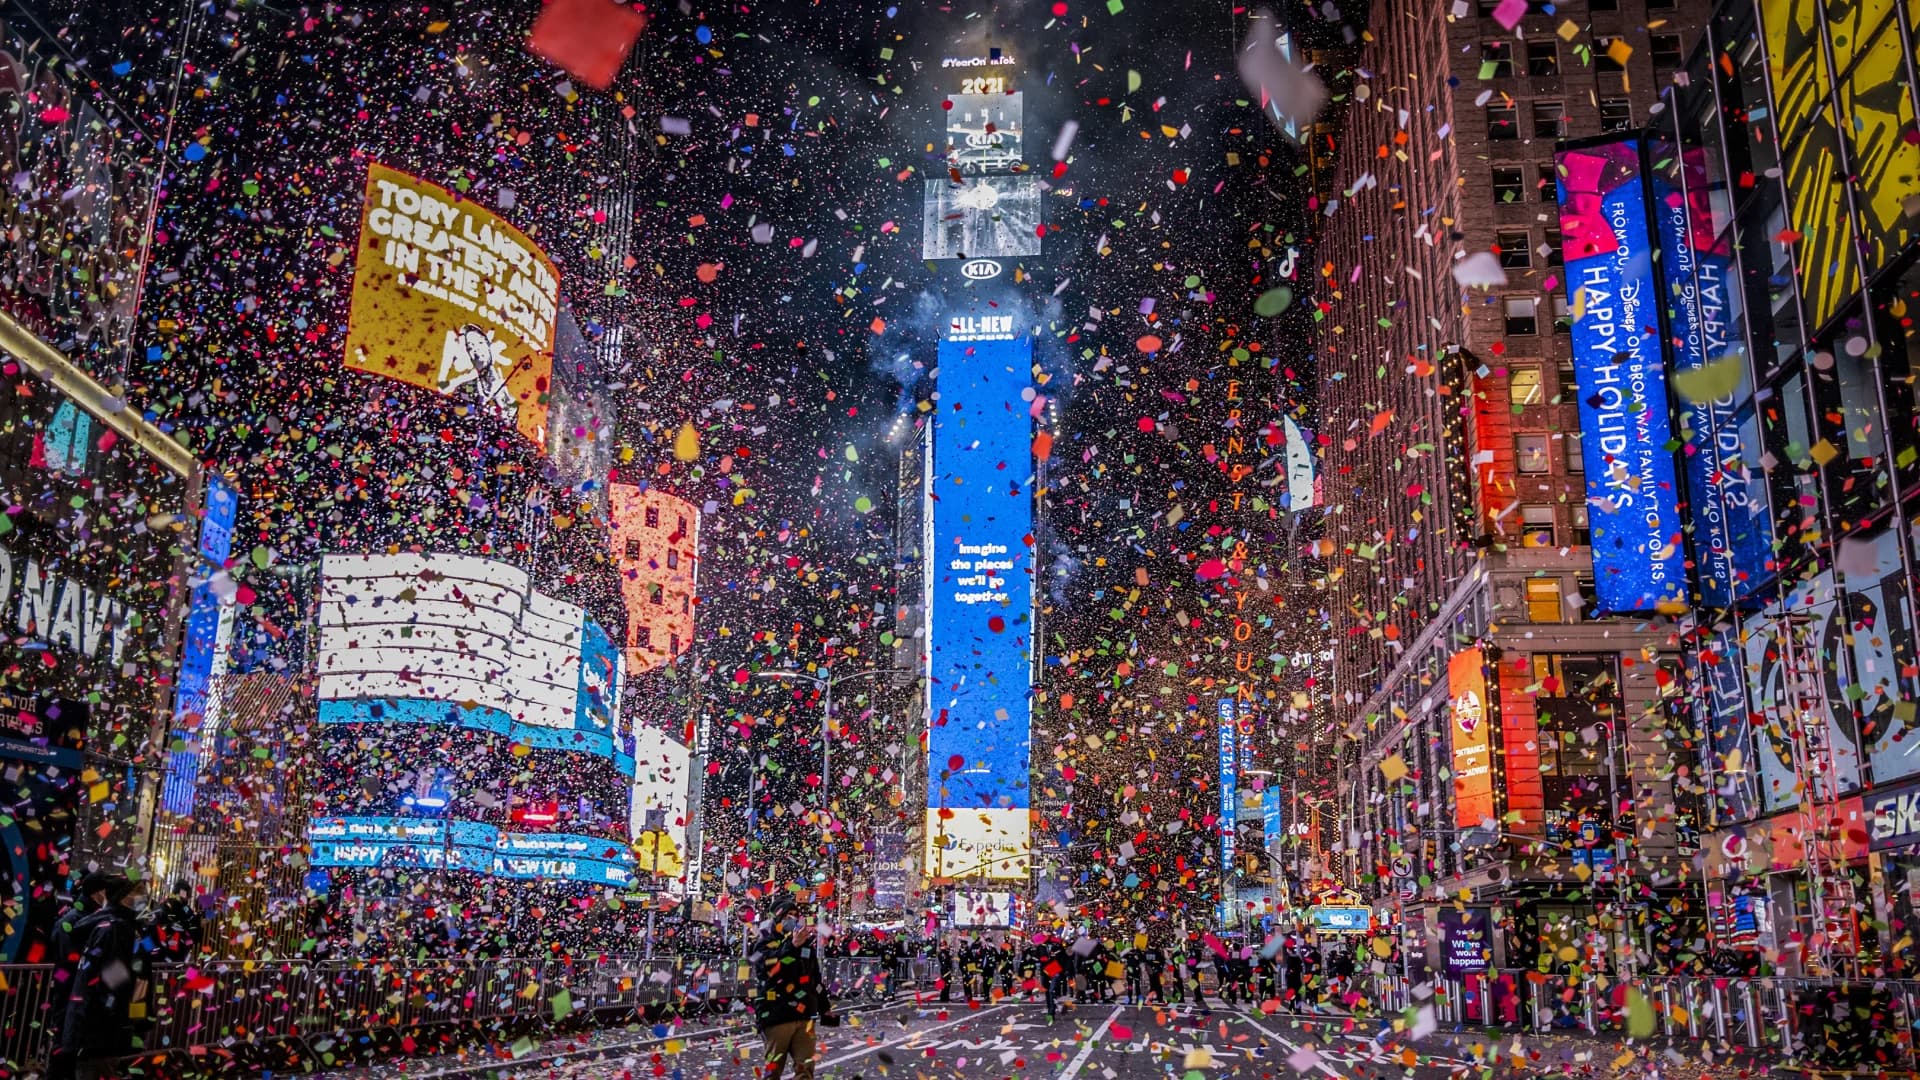 Guide: Going to NYC for New Year’s Eve? MTA says it's best way to travel